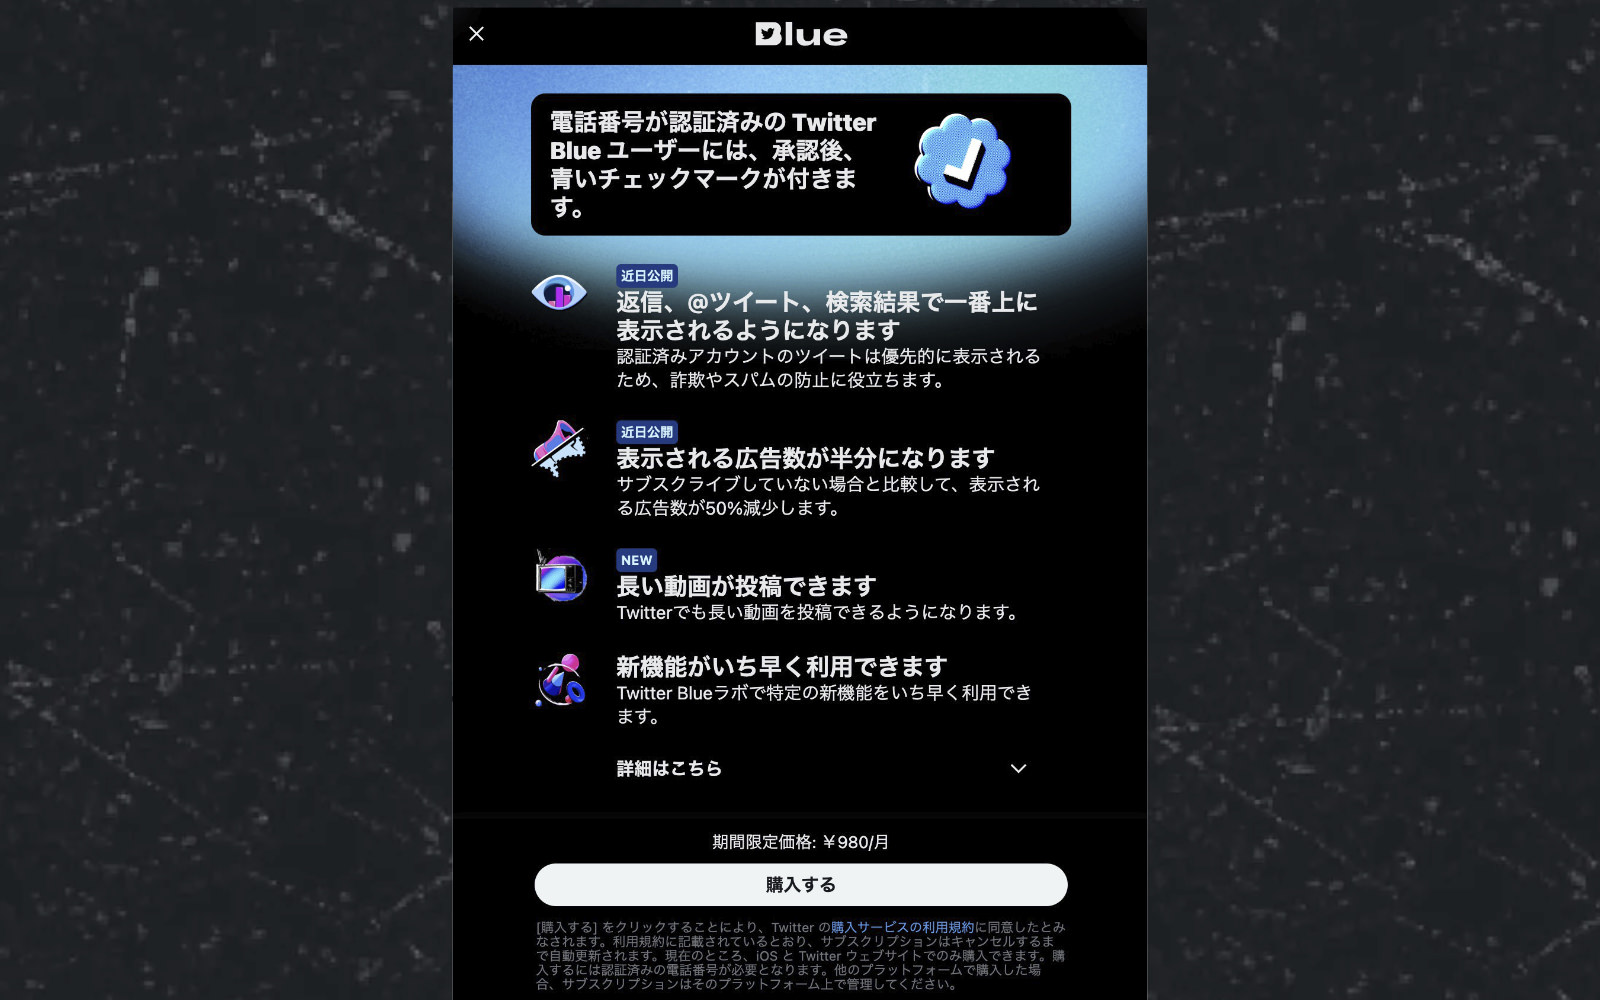 Twitter Blue official in Japan